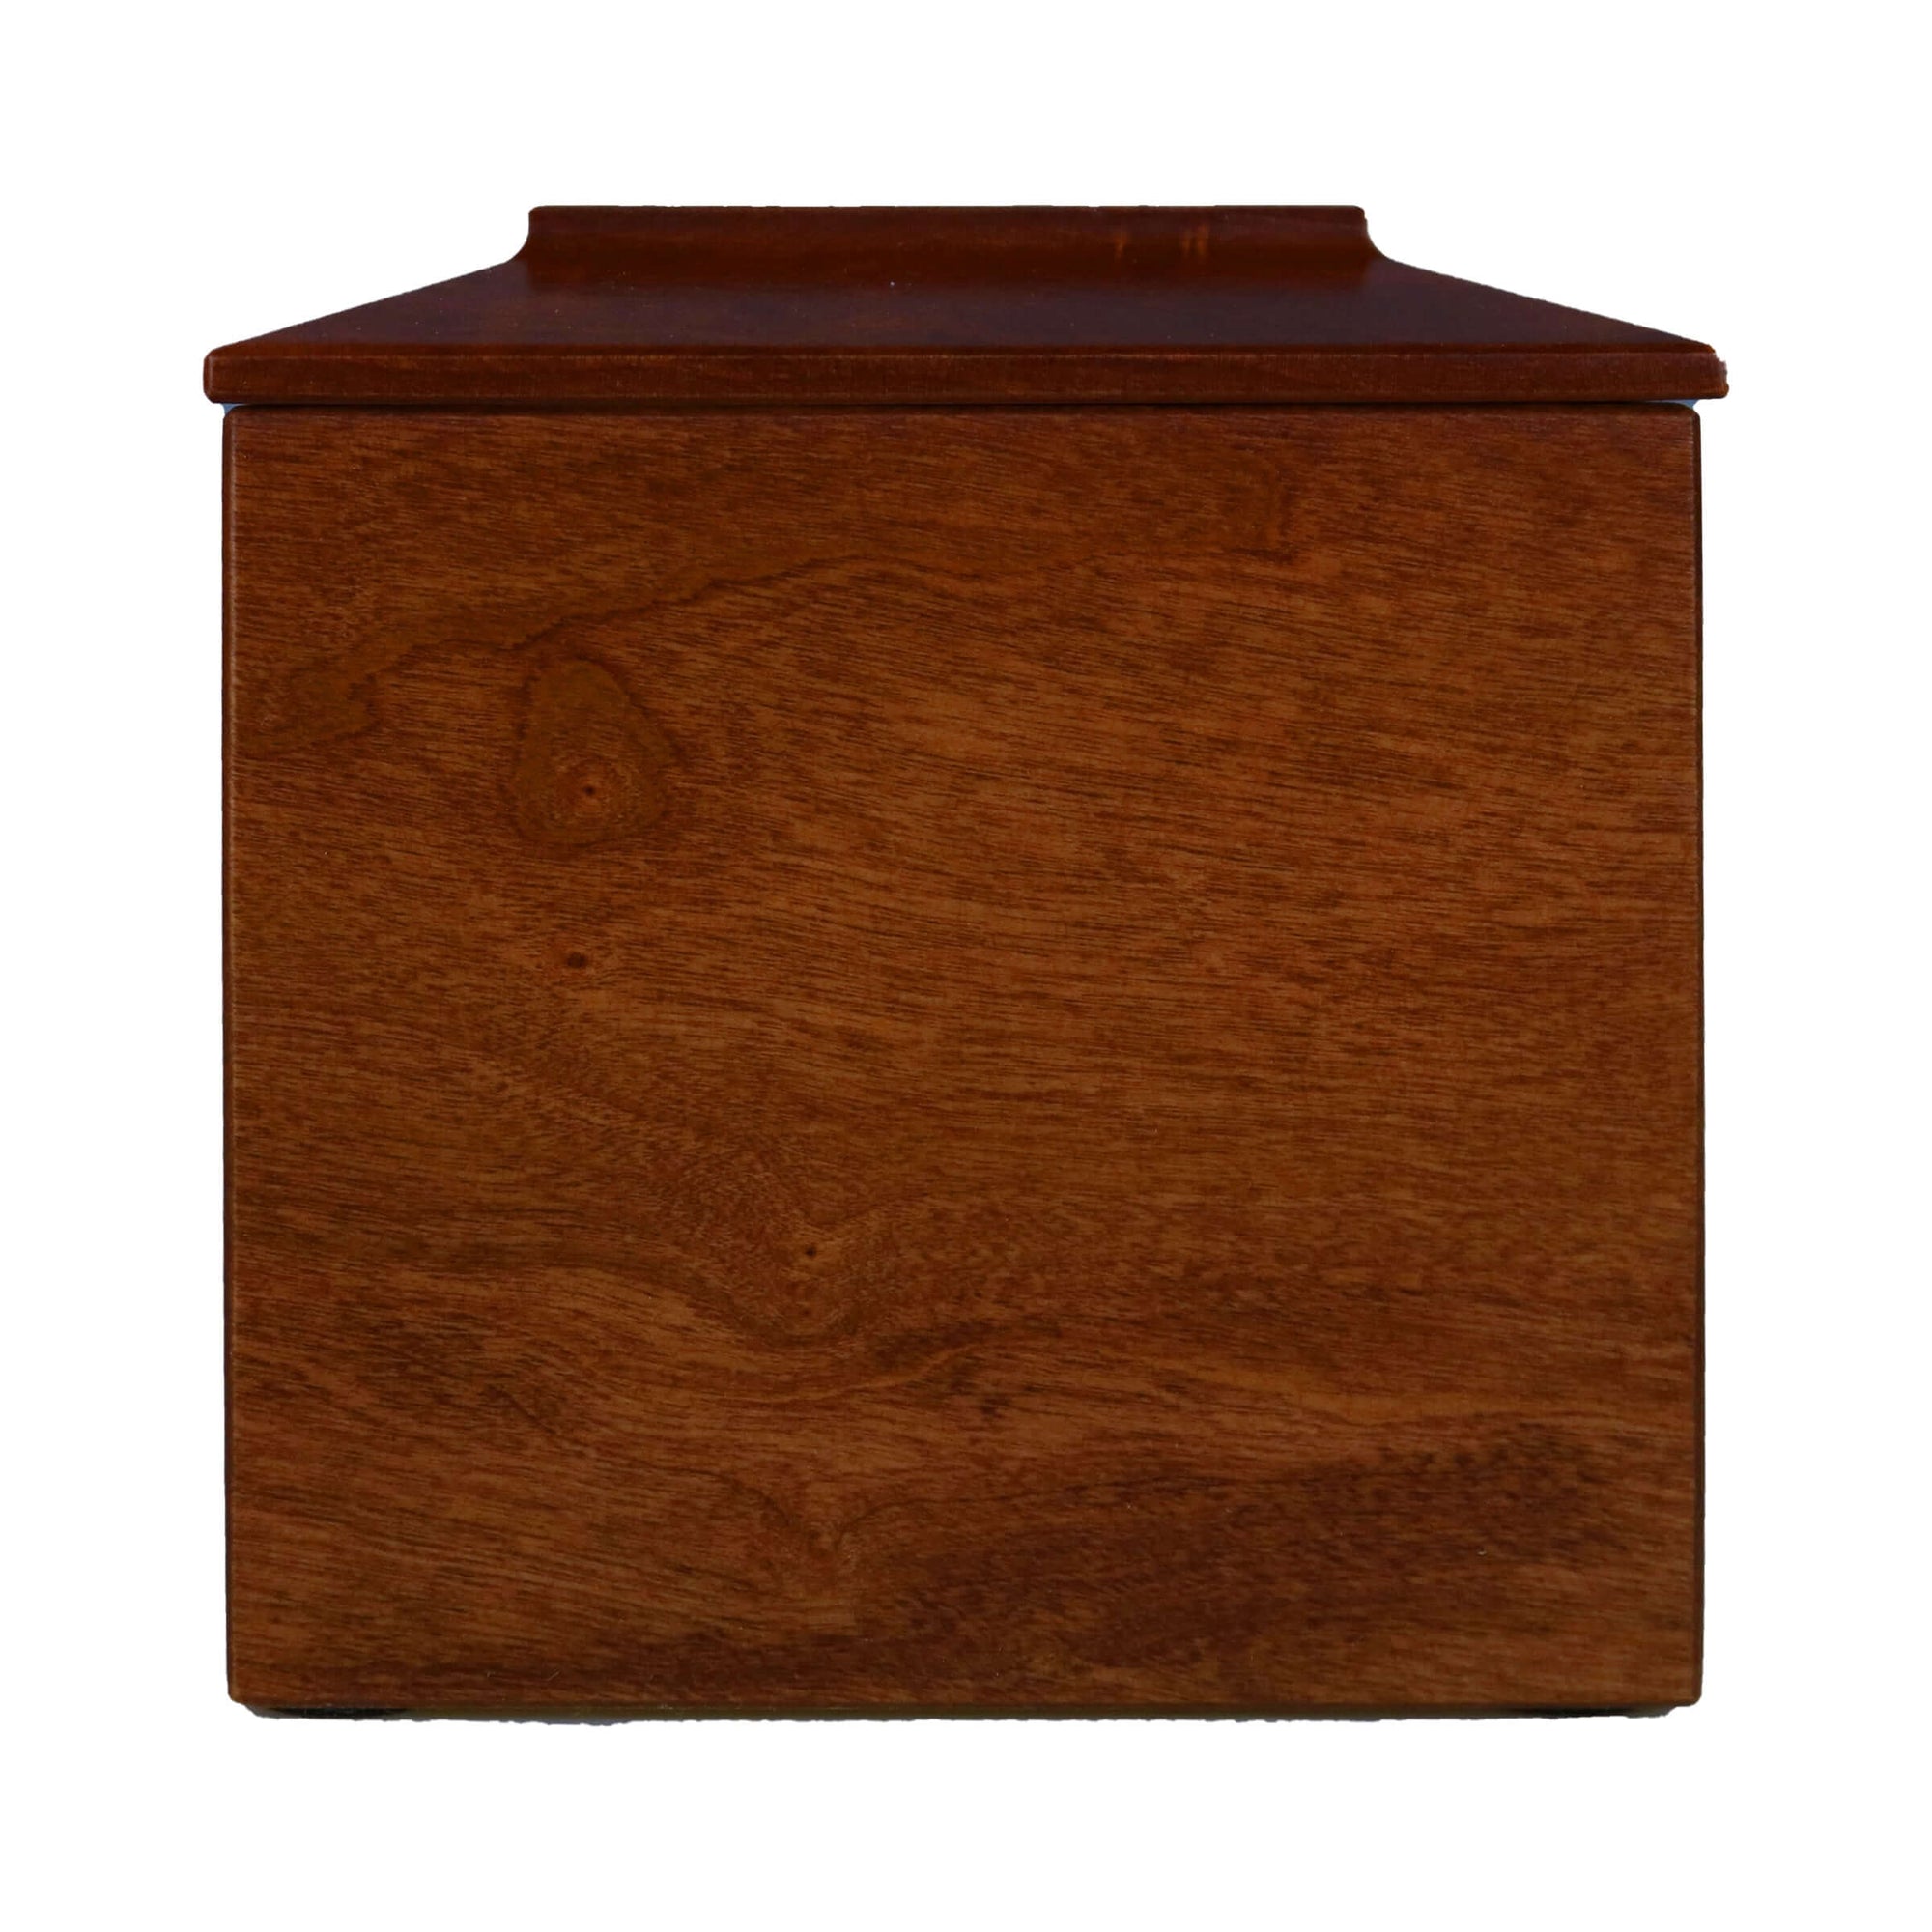 Pet Memorial Dovetail Cremation Urn Box for Dog or Cat - It Broke Our Hearts To Lose You